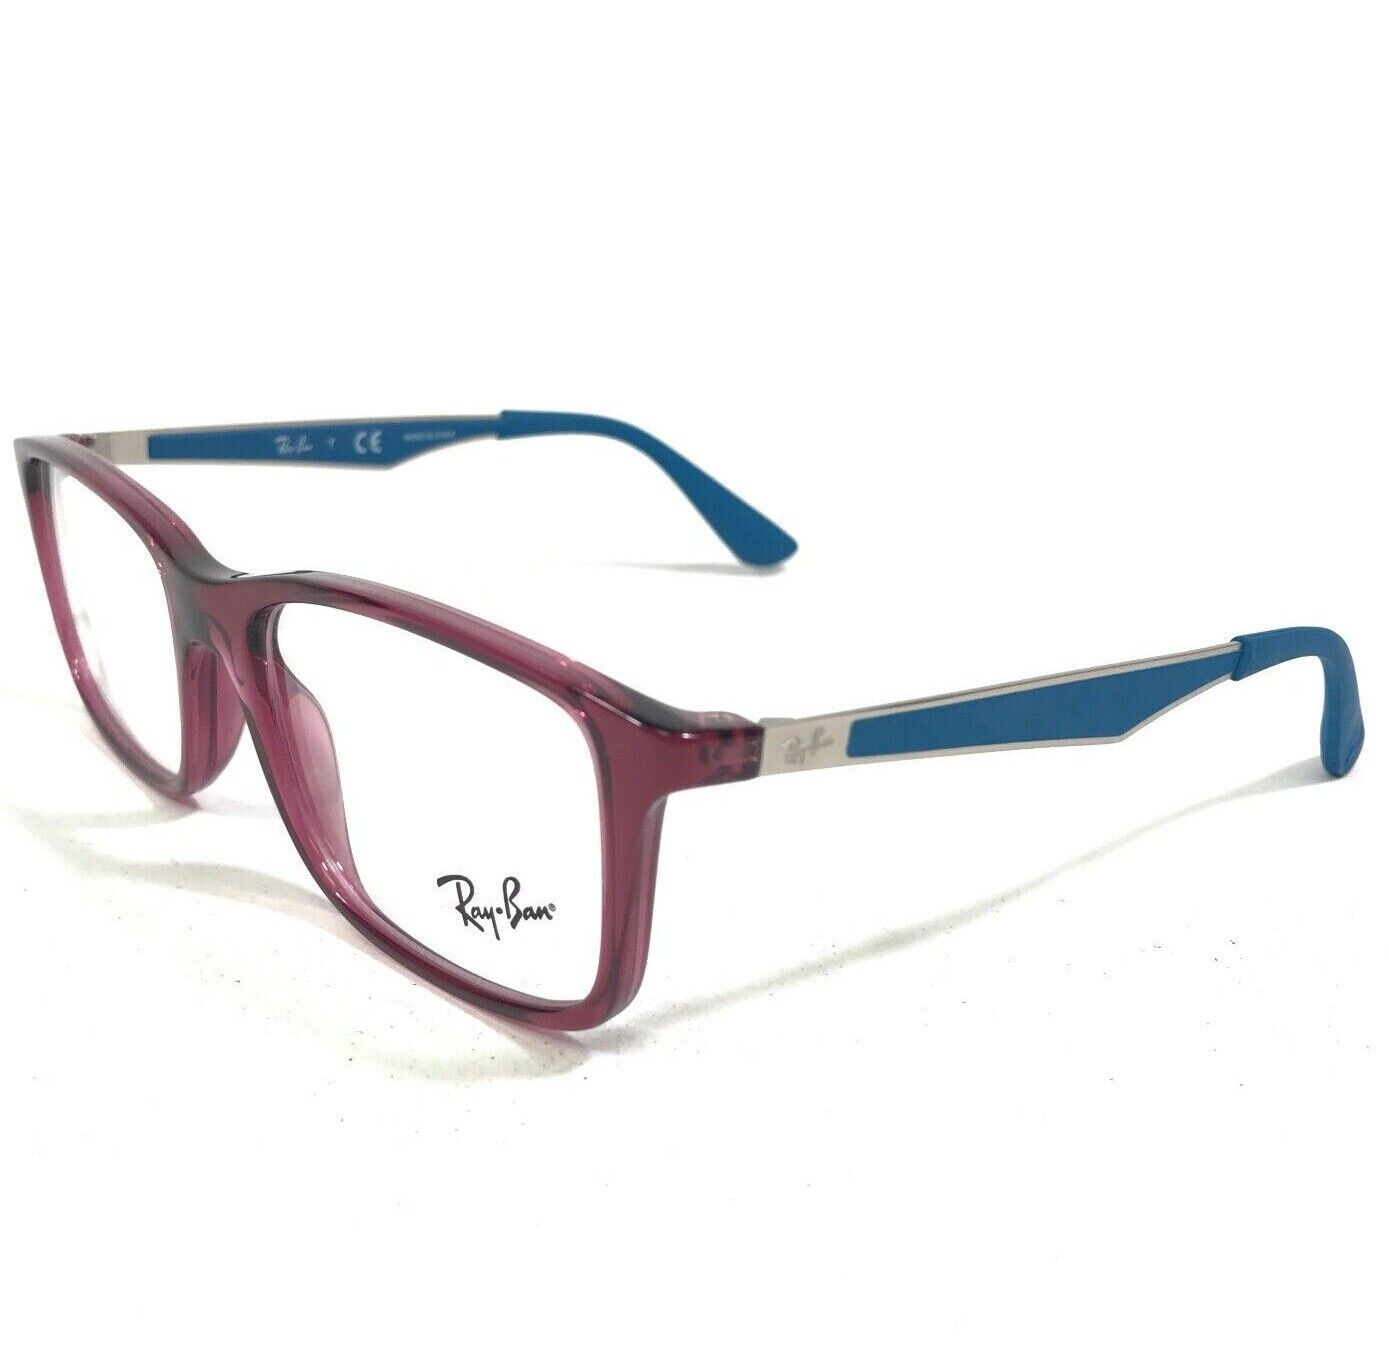 Primary image for Ray-Ban Kids Eyeglasses Frames RB1570 3722 Blue Clear Purple Square 49-16-130